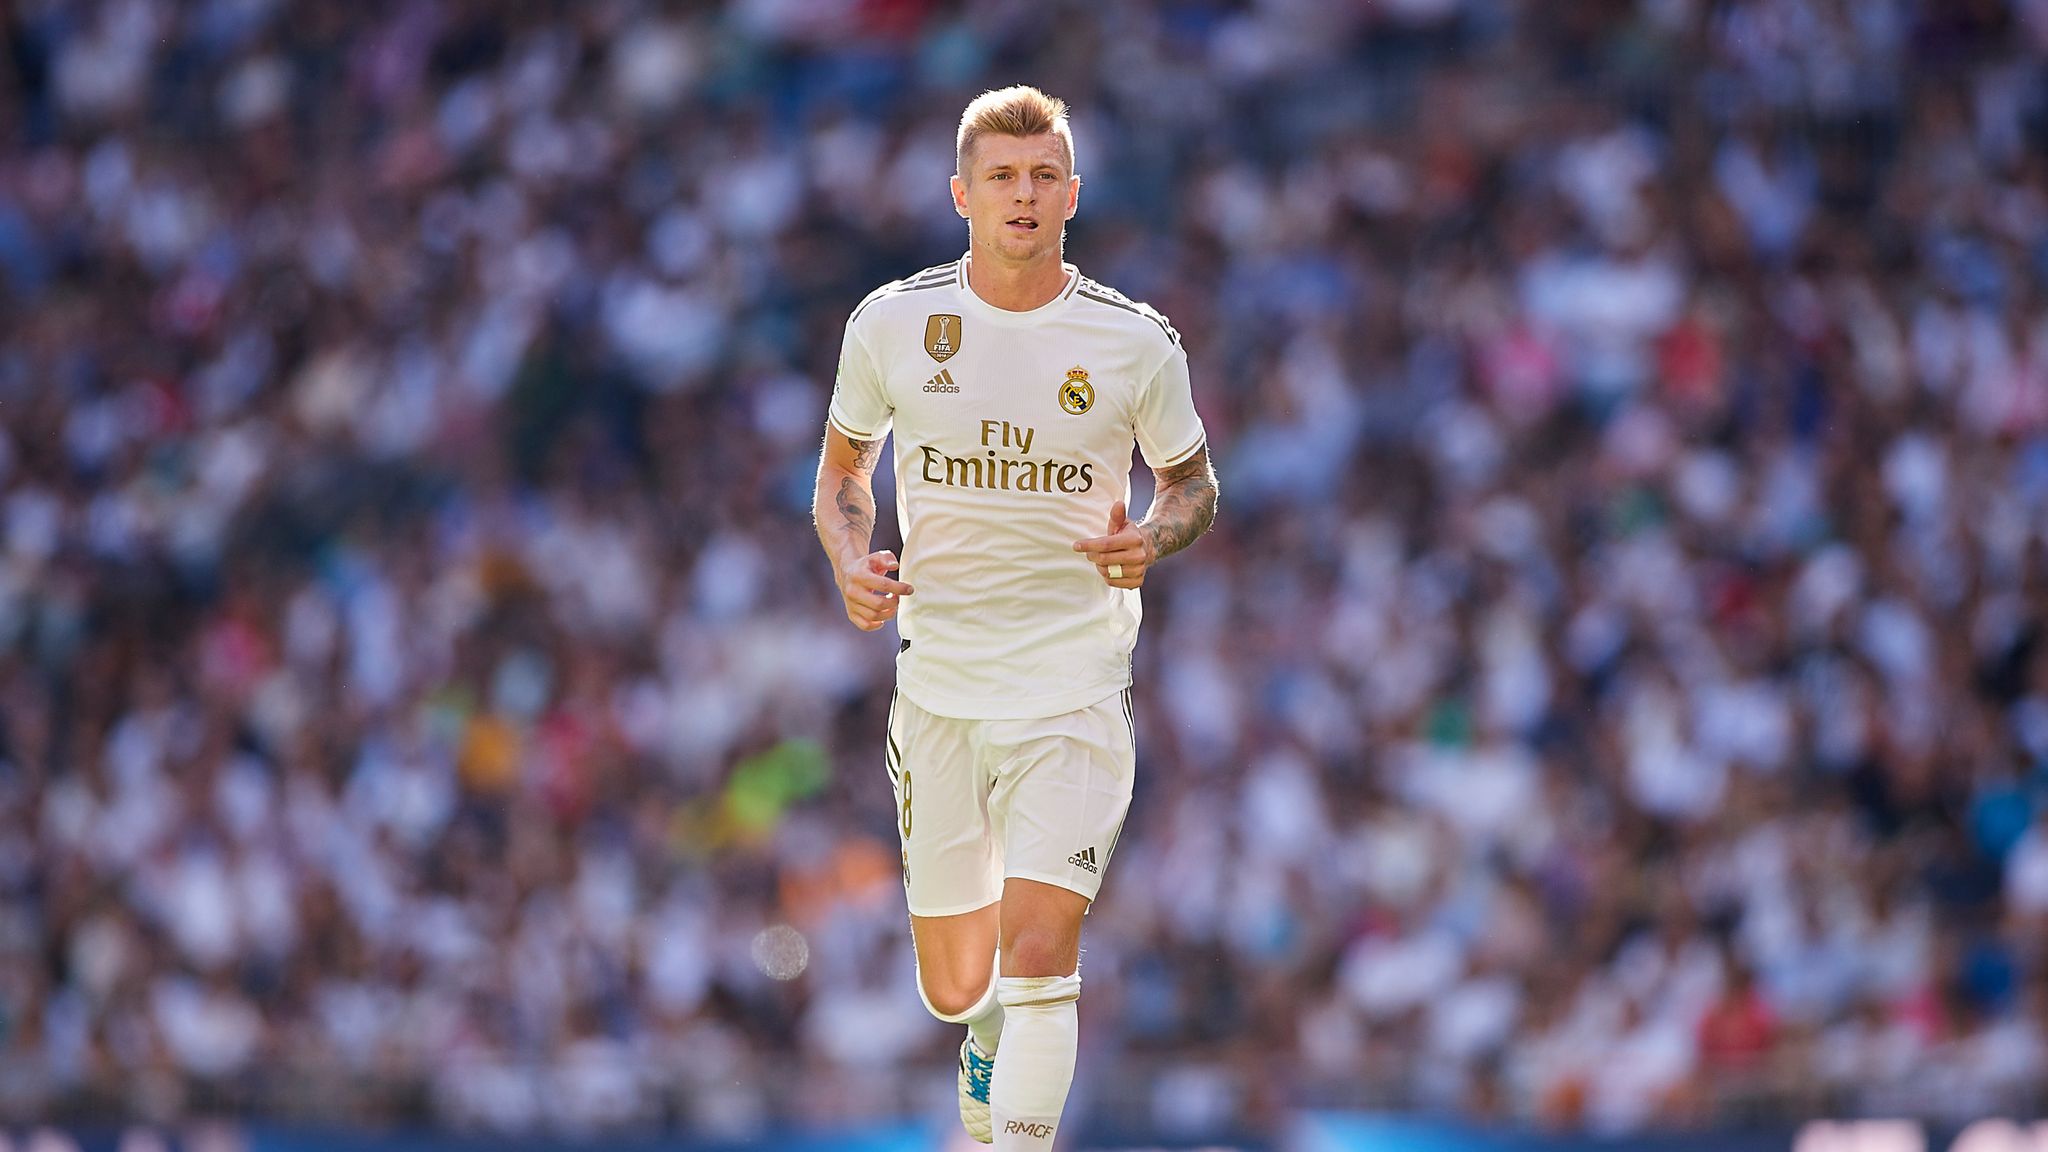 Toni Kroos' Manchester United move scuppered by David Moyes sacking, says Real Madrid midfielder